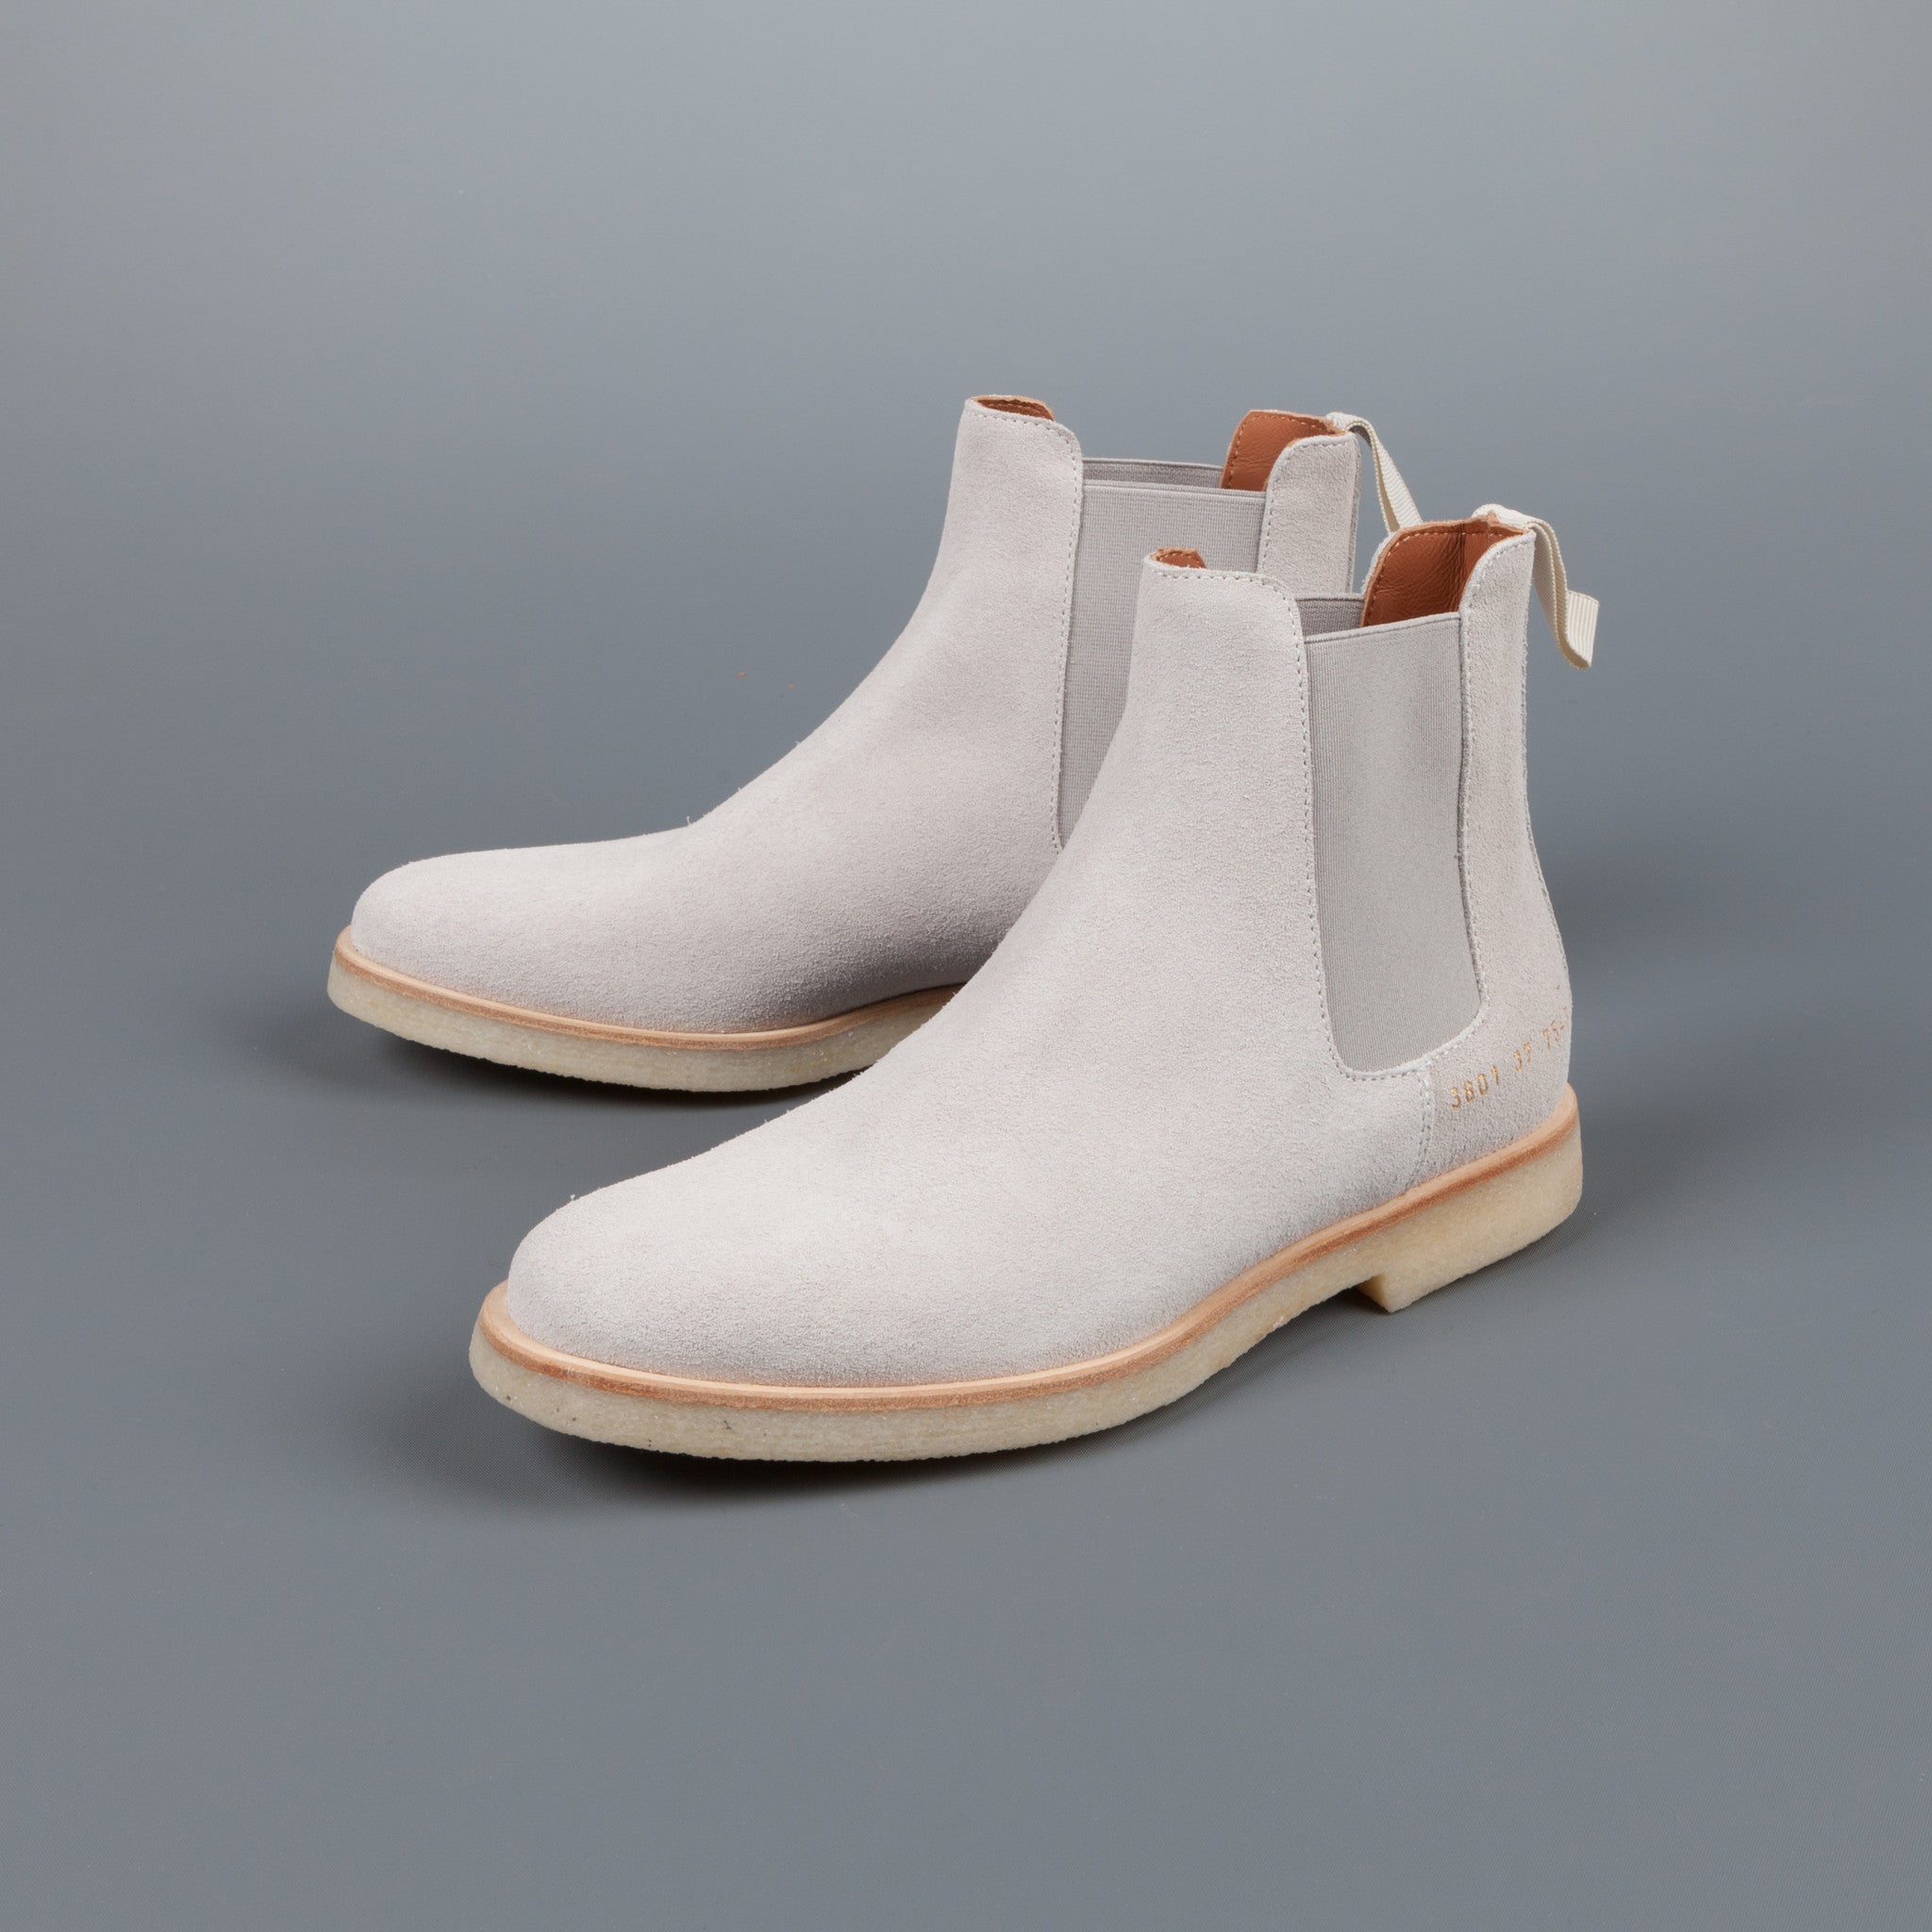 Common Projects Woman by Common Projects Chelsea boot in Suede – Frans Boone Store